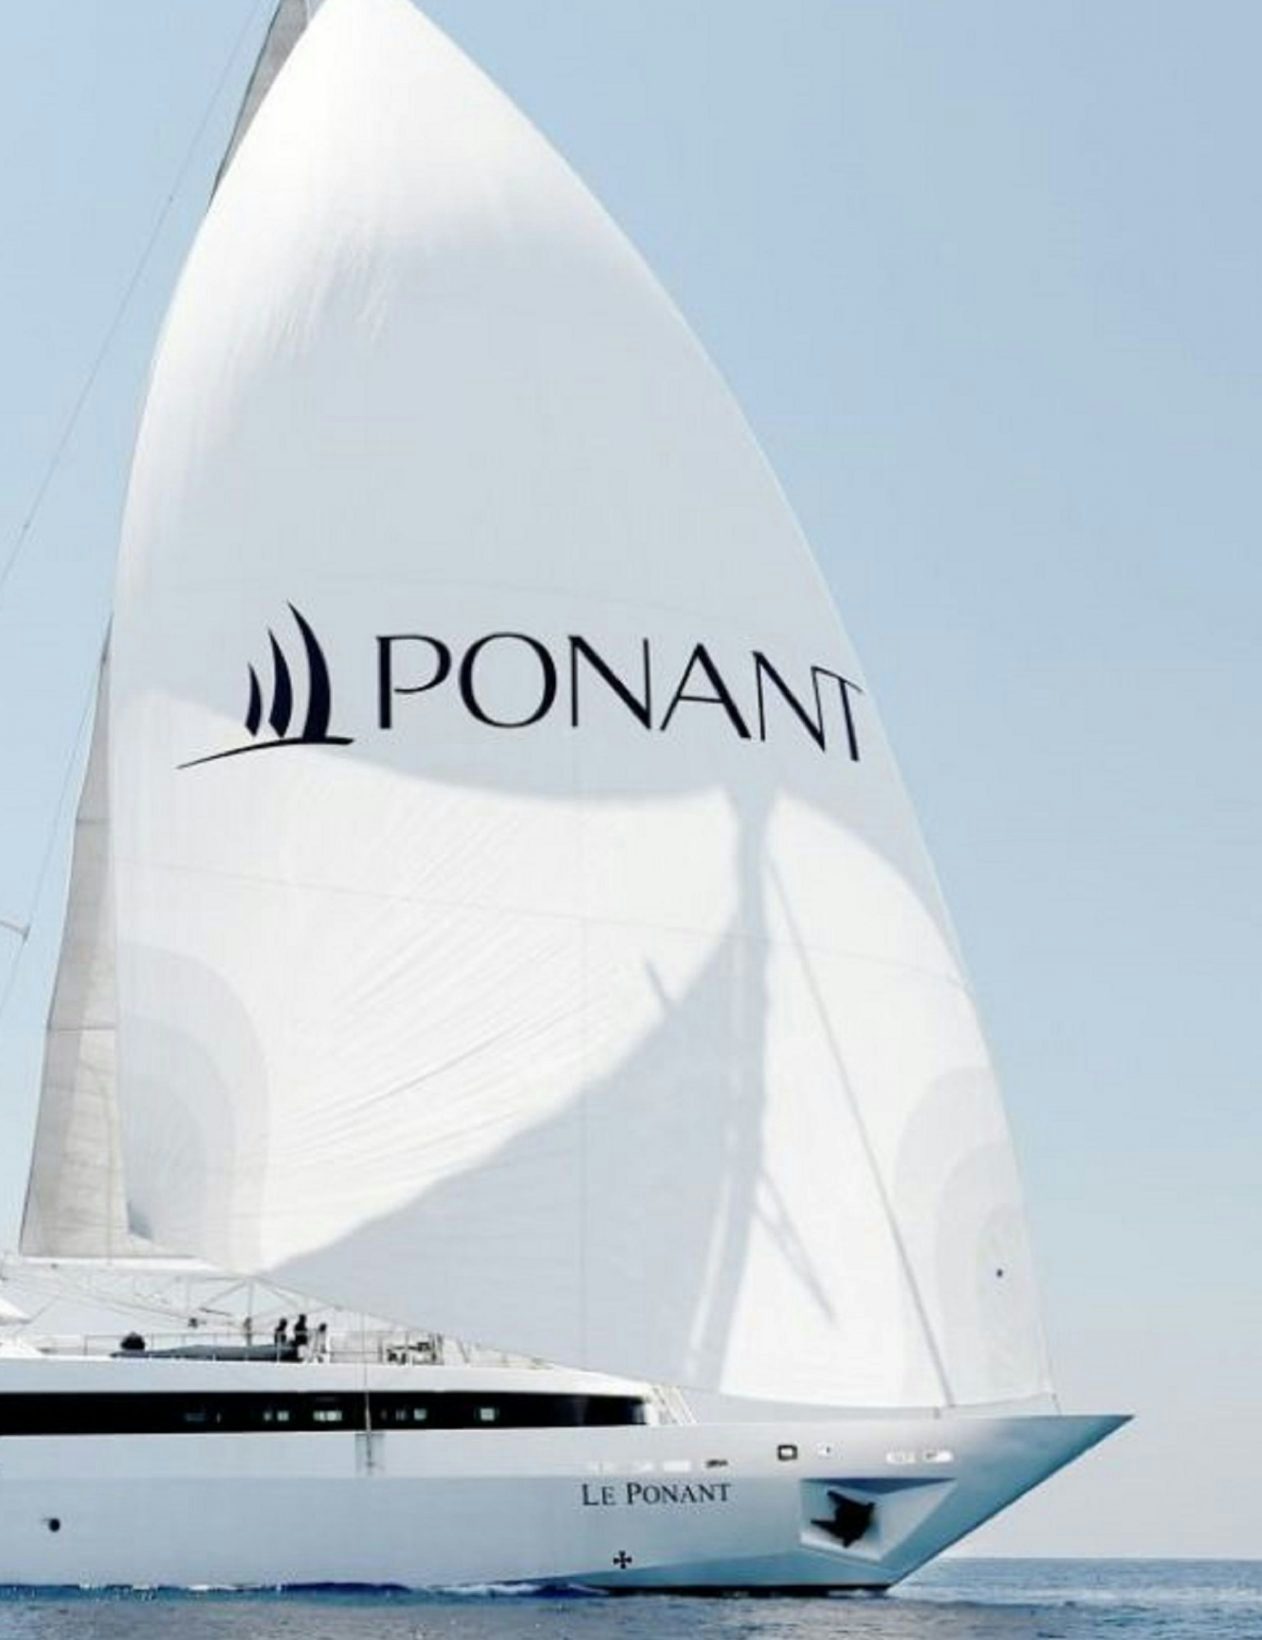 Relais & Châteaux signs an agreement with Ponant